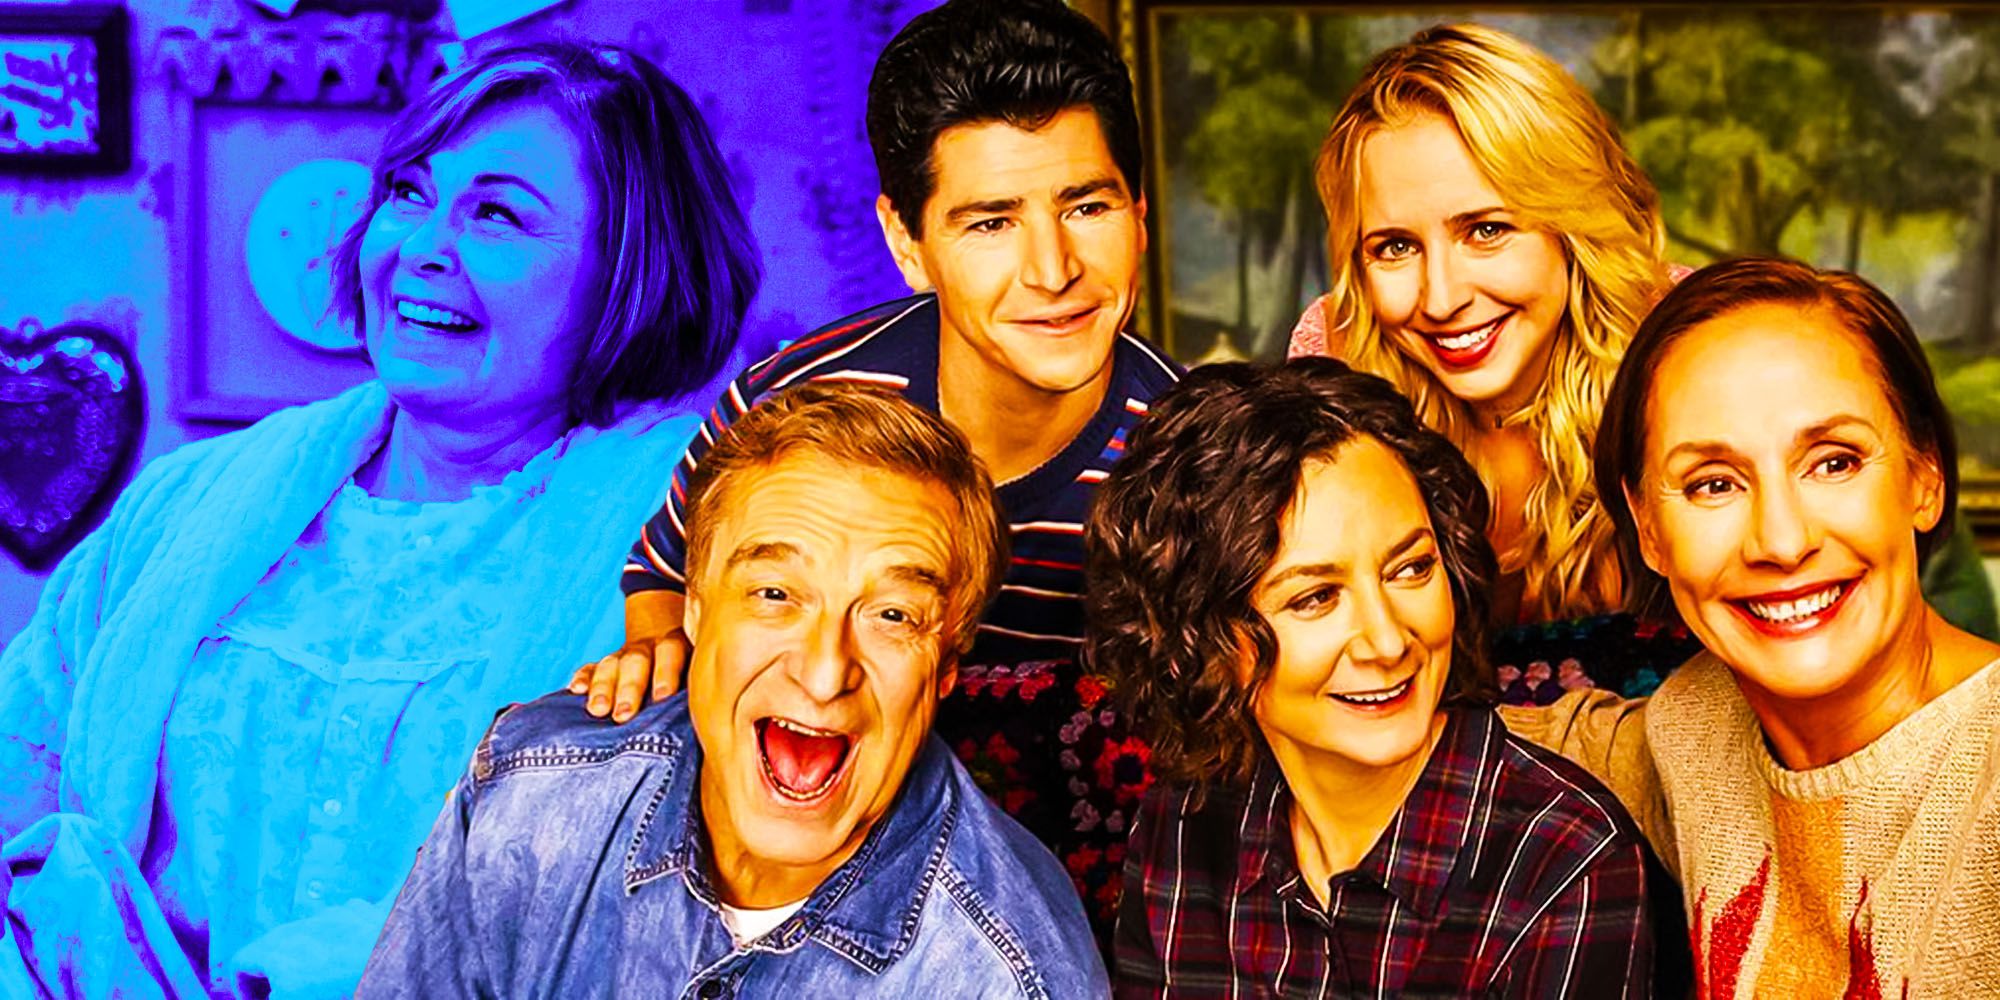 The conners Roseanne rule